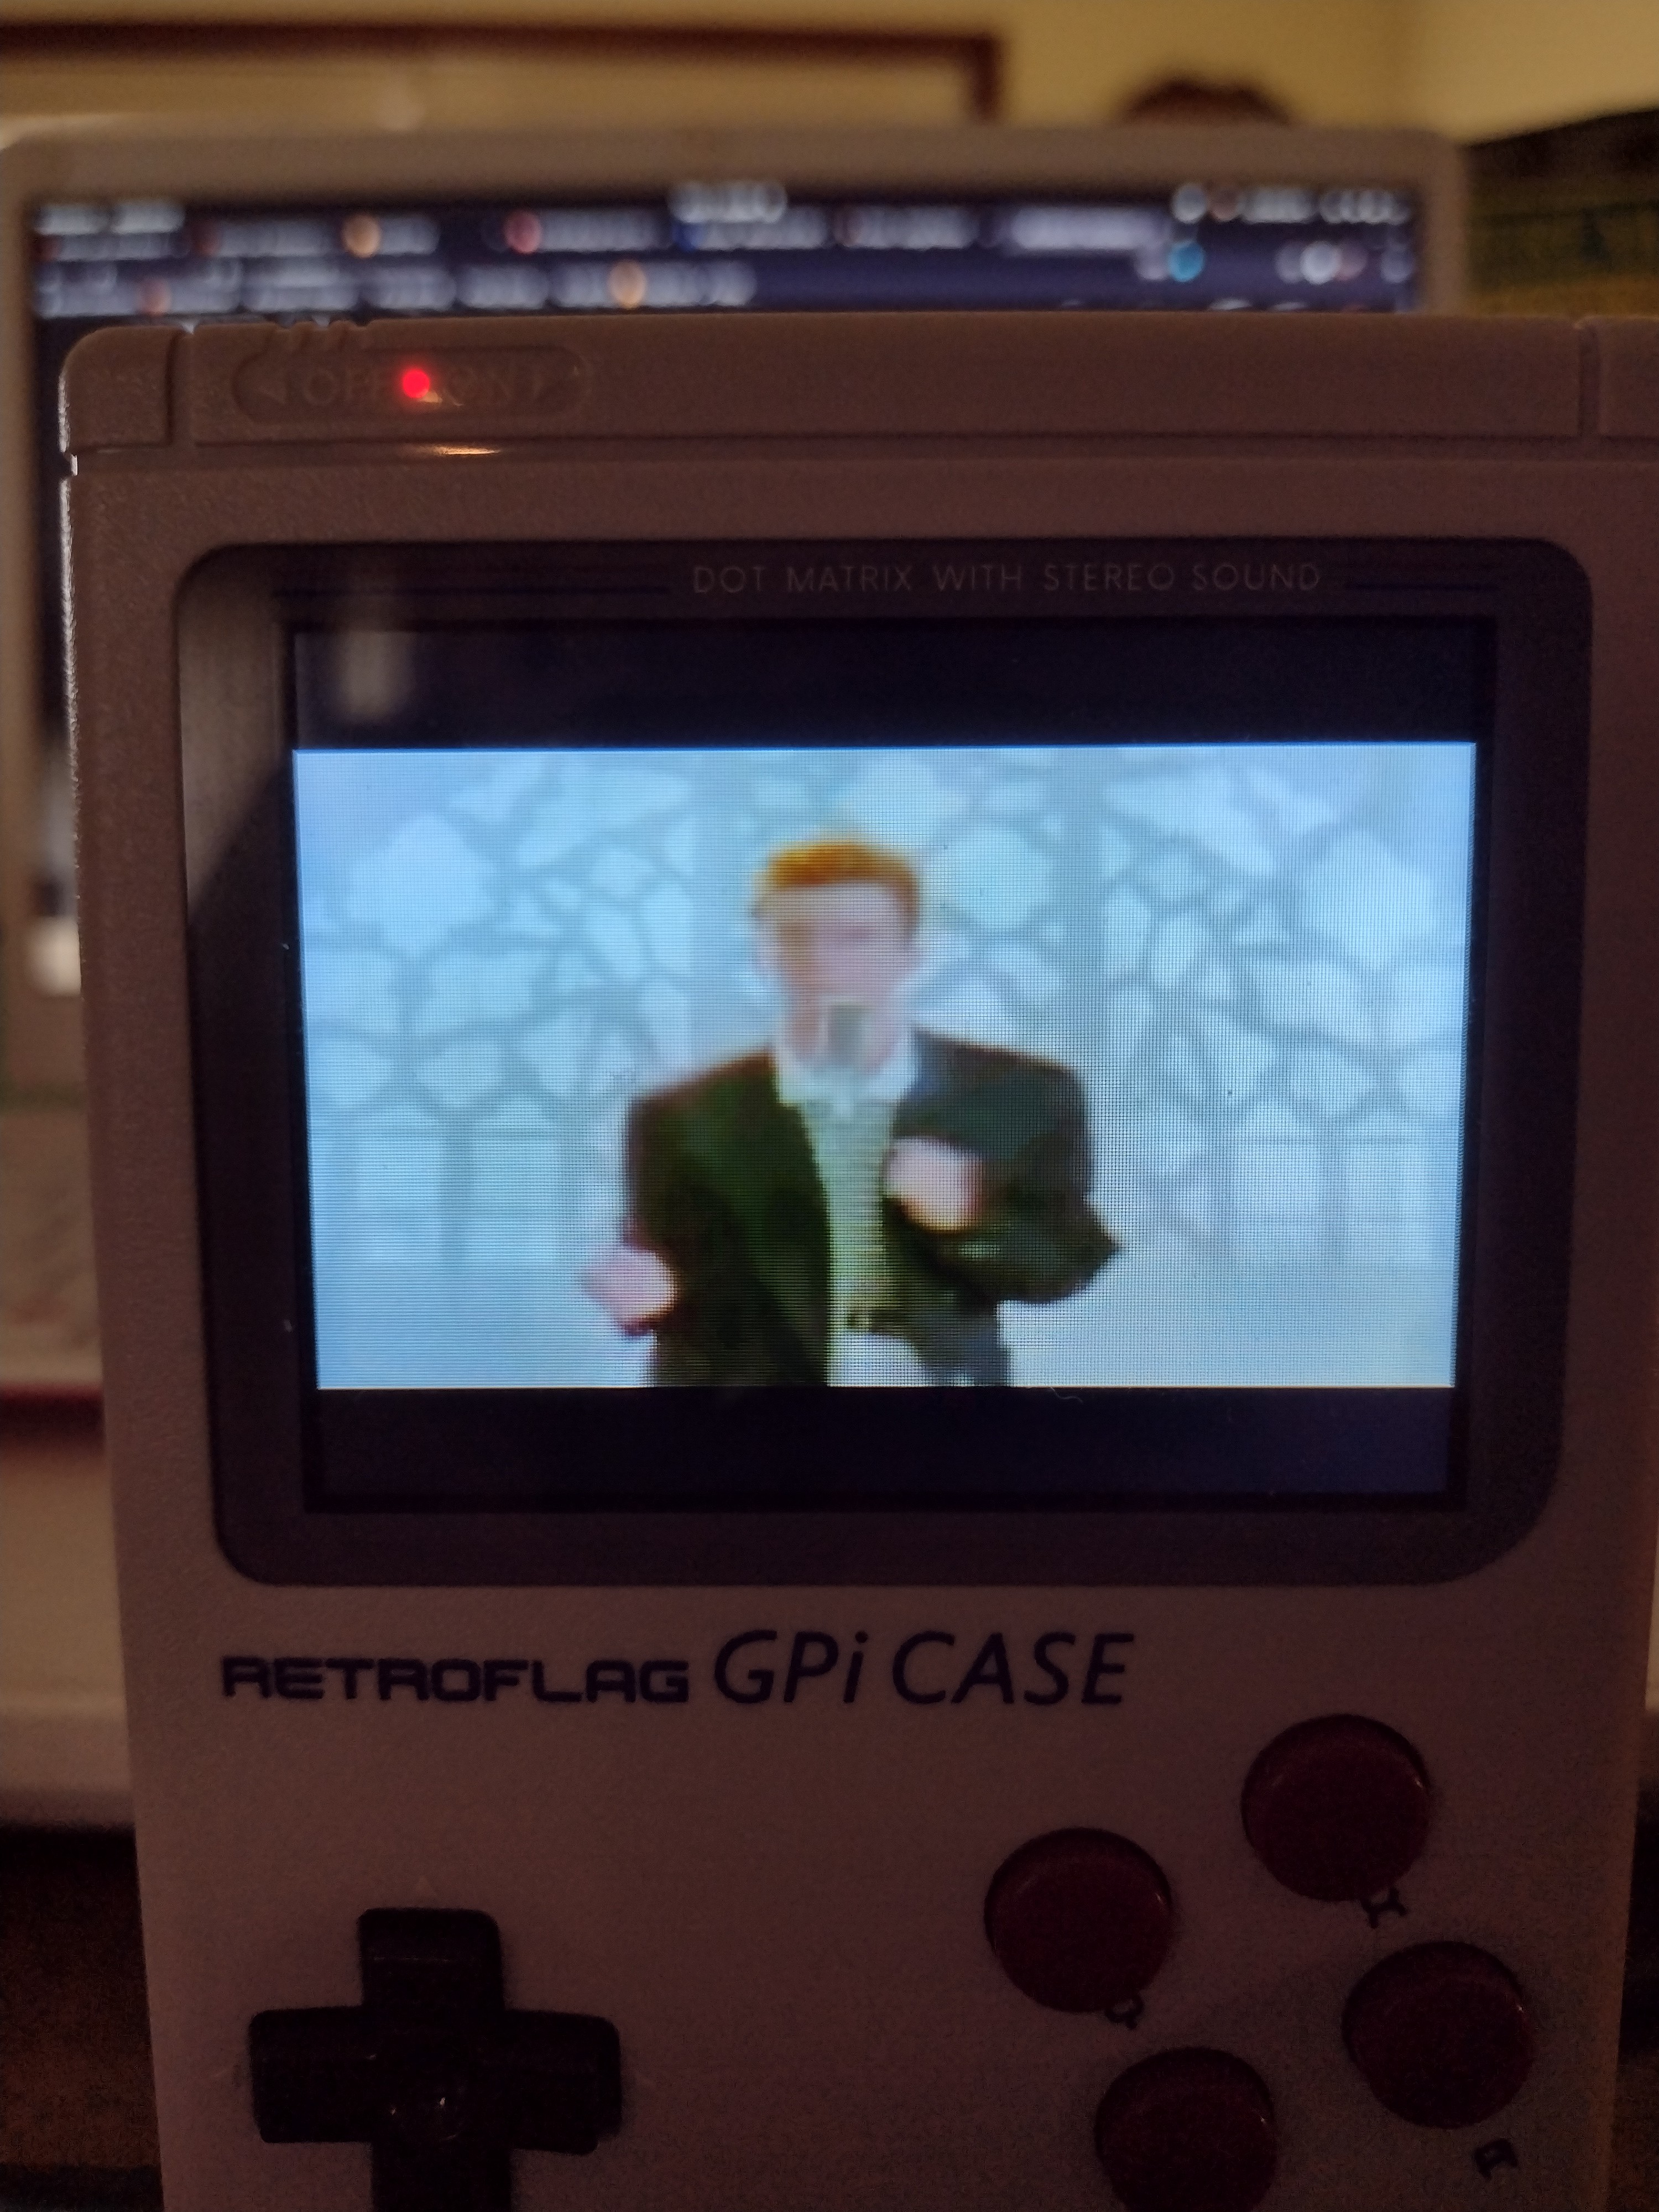 Anyone else this screen issue with their GPI case 2w? It's sideways and  I've tried 2 different cases and a brand new pi zero 2w : r/retroflag_gpi